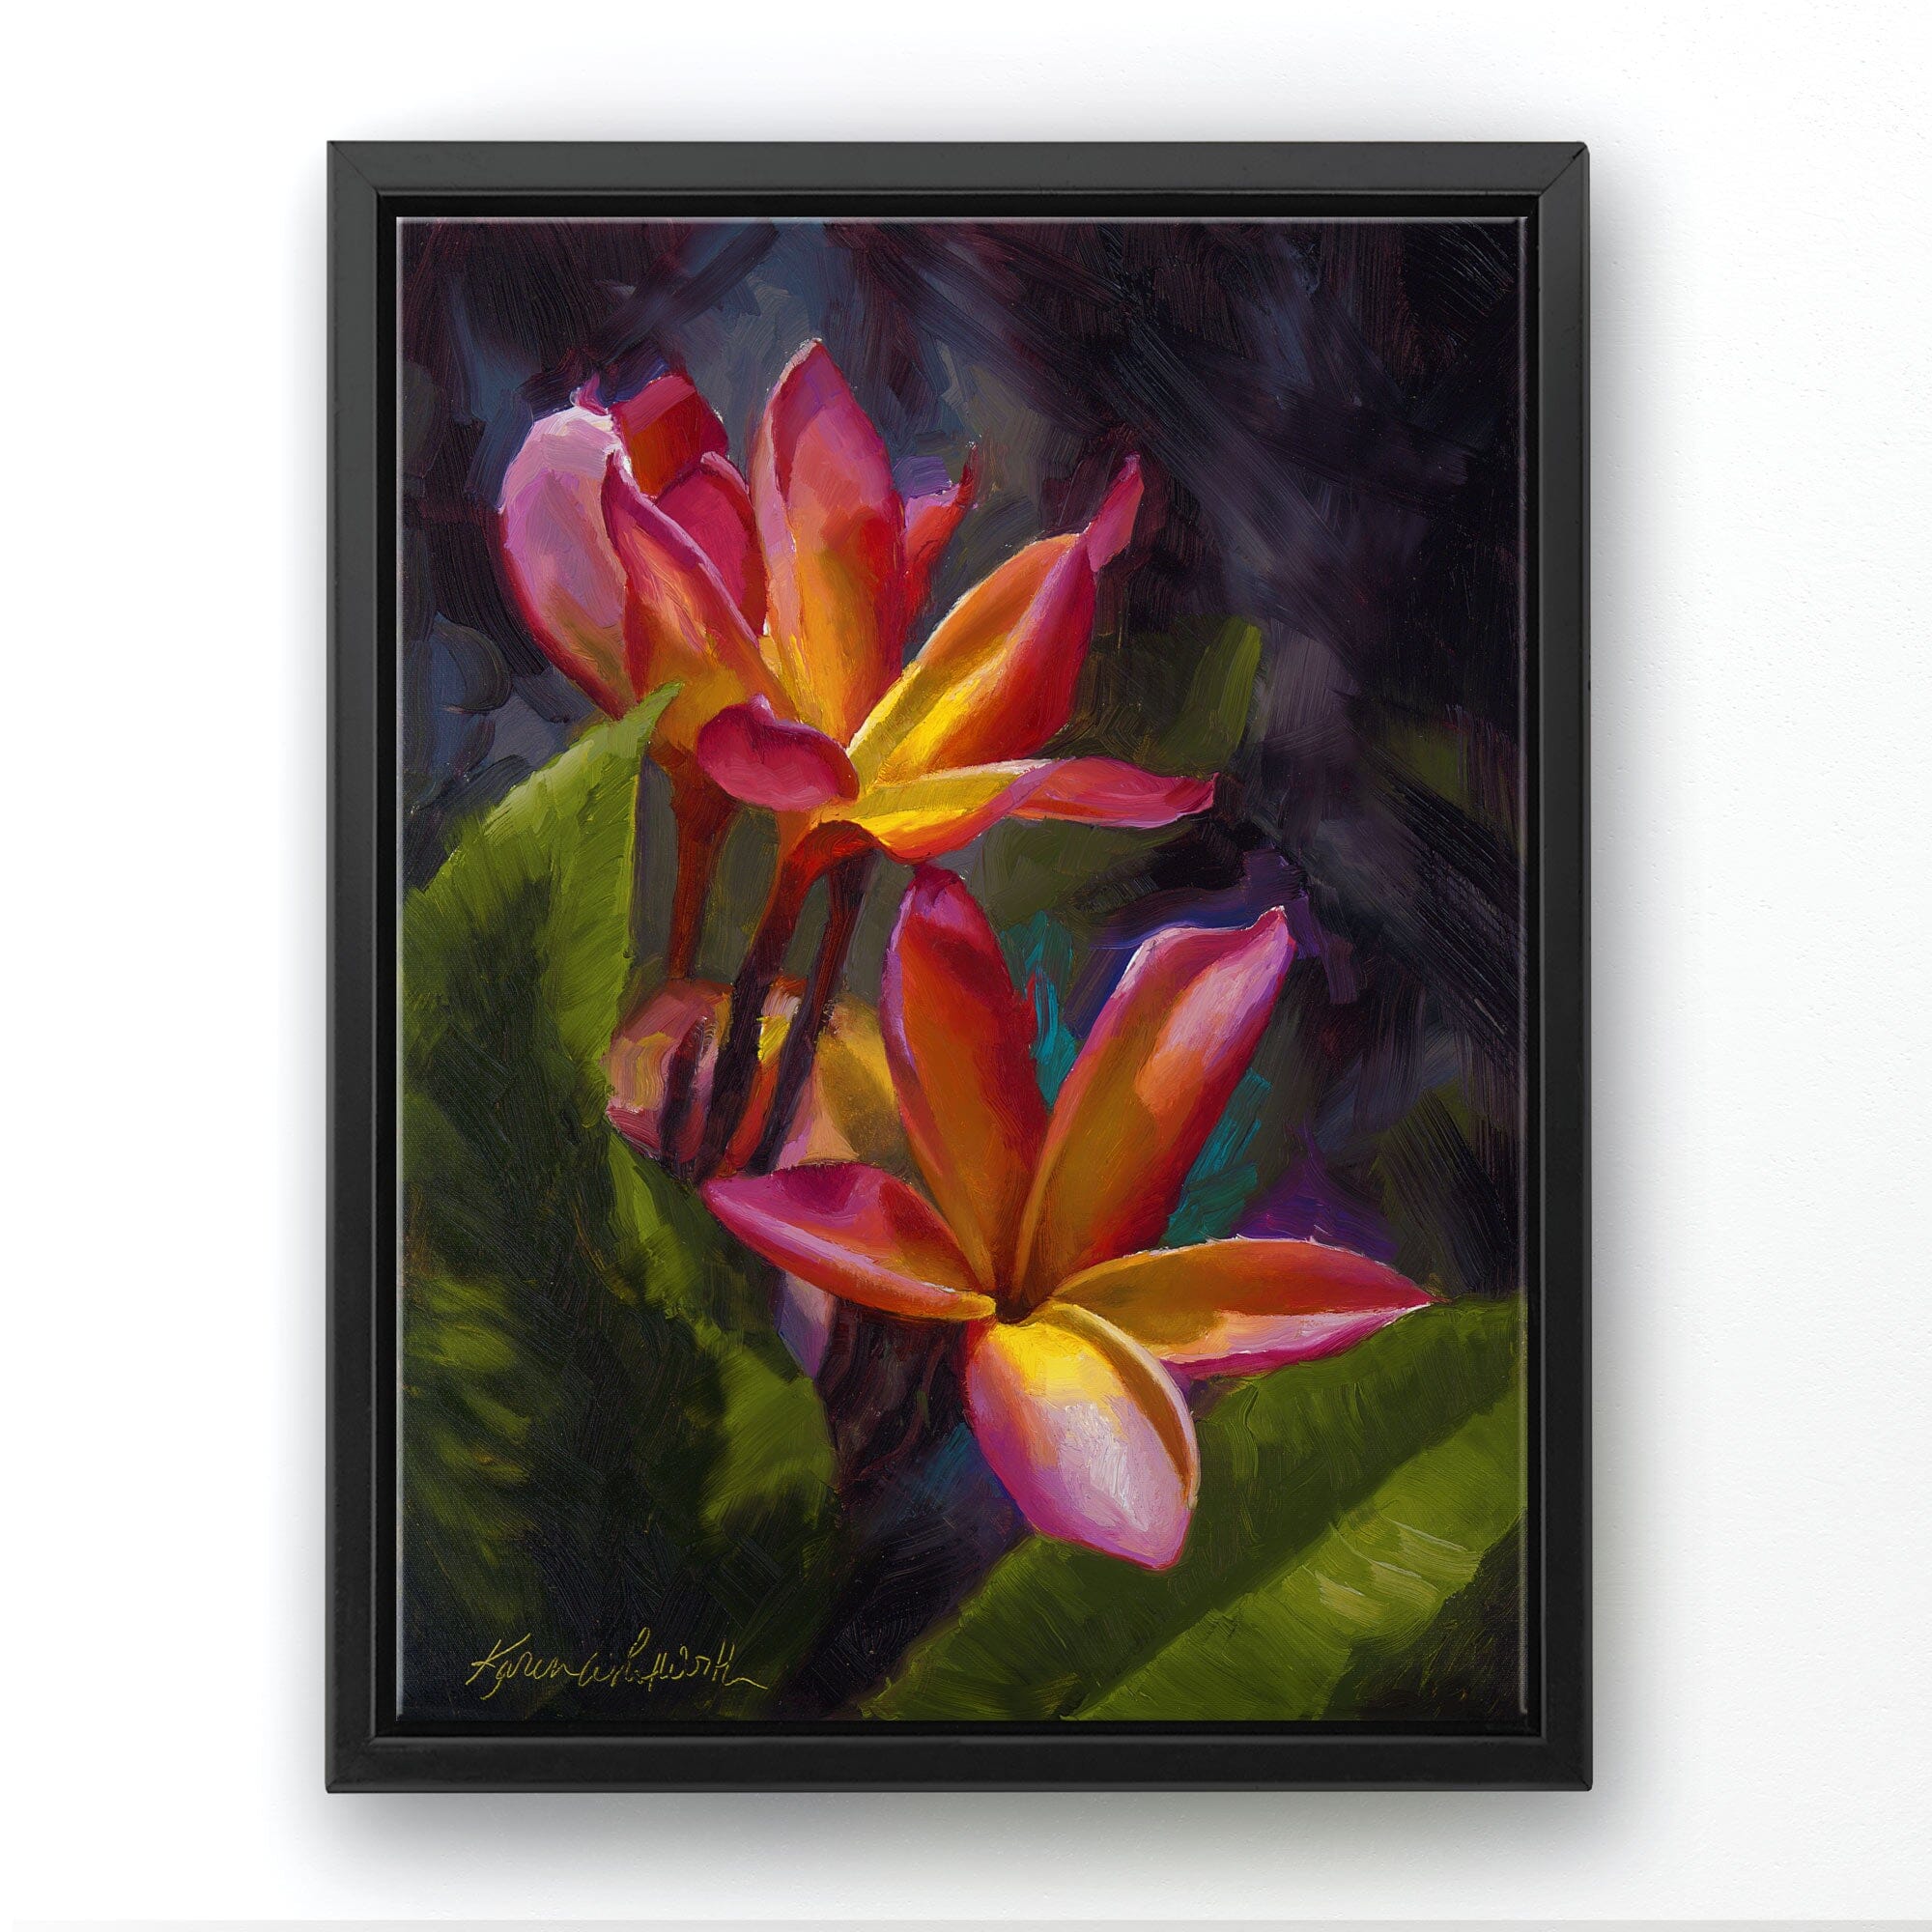 Tropical plumeria canvas art of Hawaii floral painting by artist Karen Whitworth. The canvas is framed in a black floater frame and is hanging on a white wall.